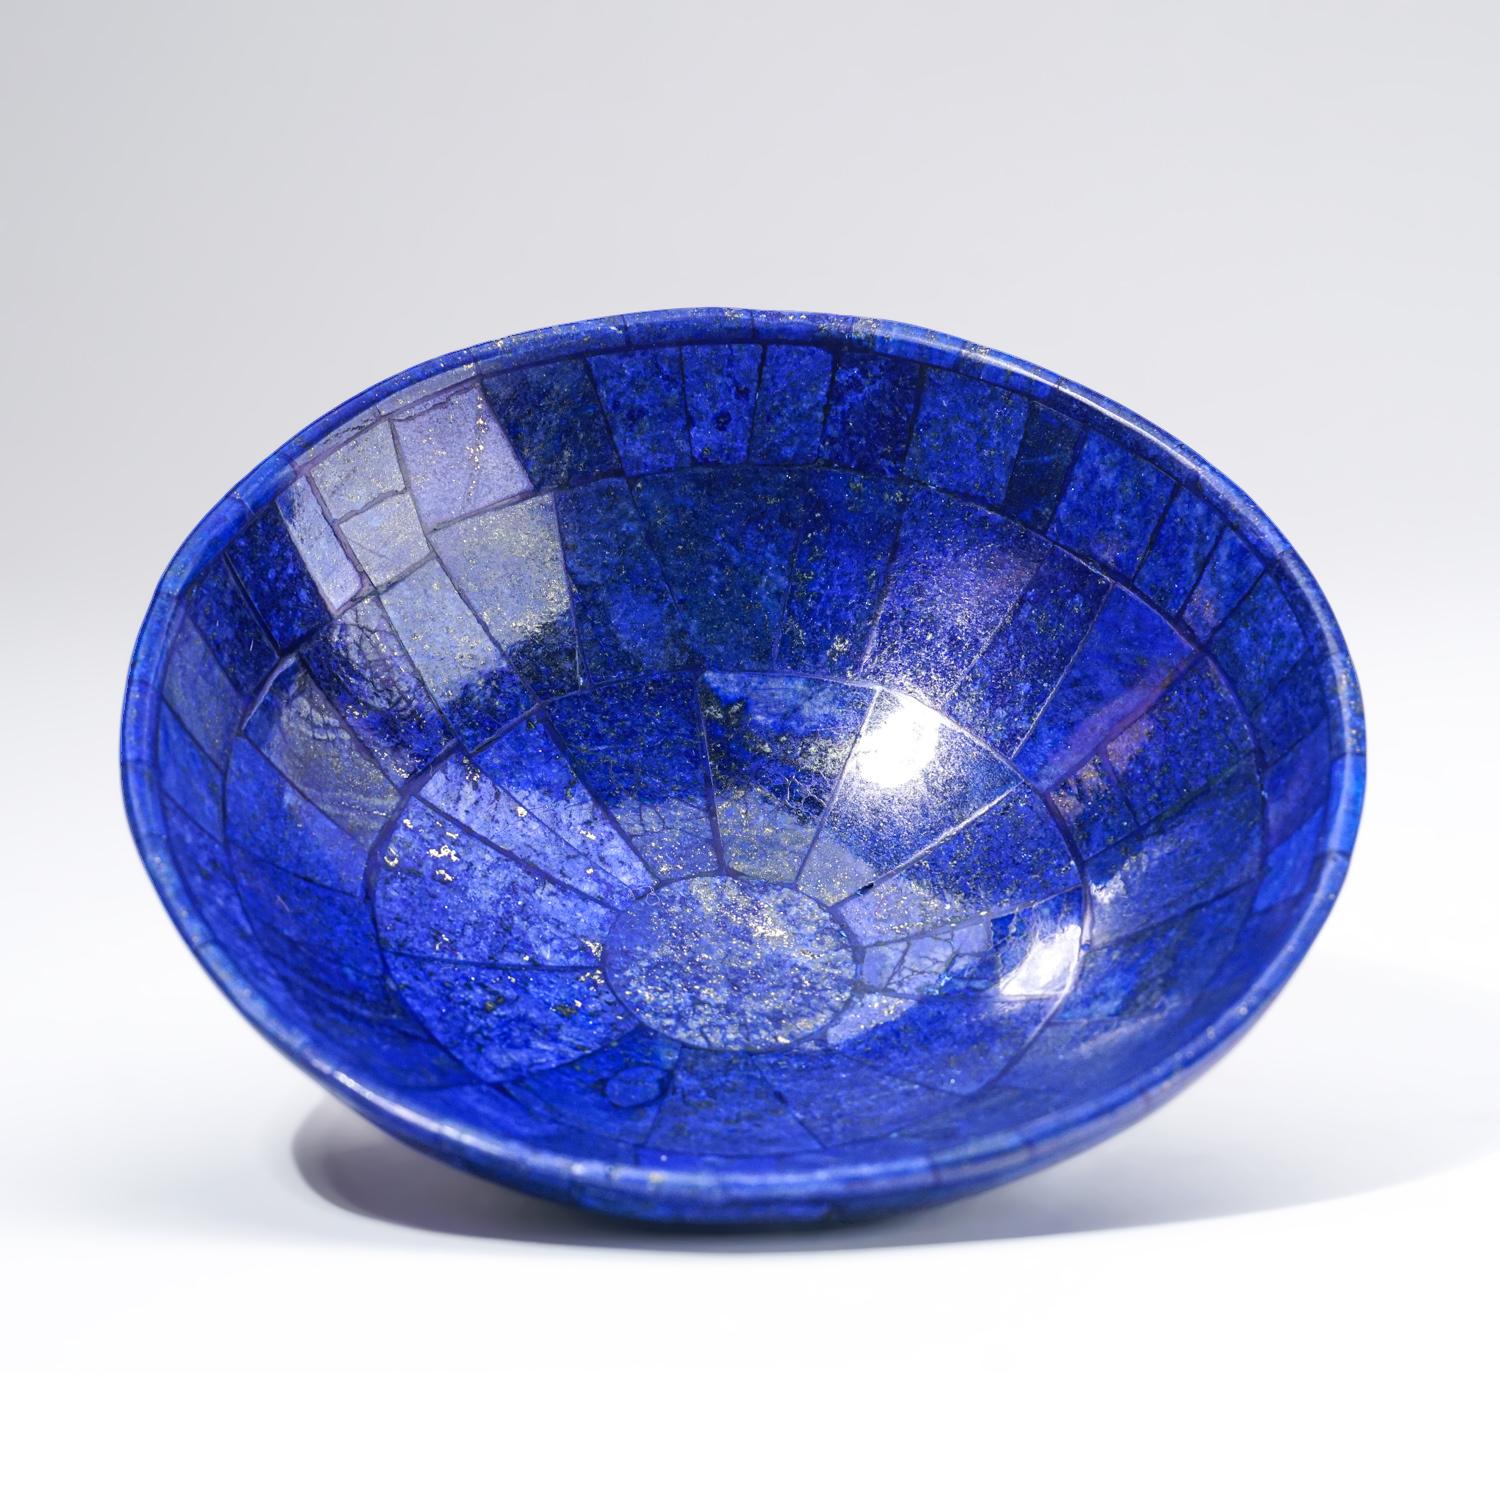 Contemporary Genuine Polished Lapis Lazuli Bowl (1.7 lbs) For Sale